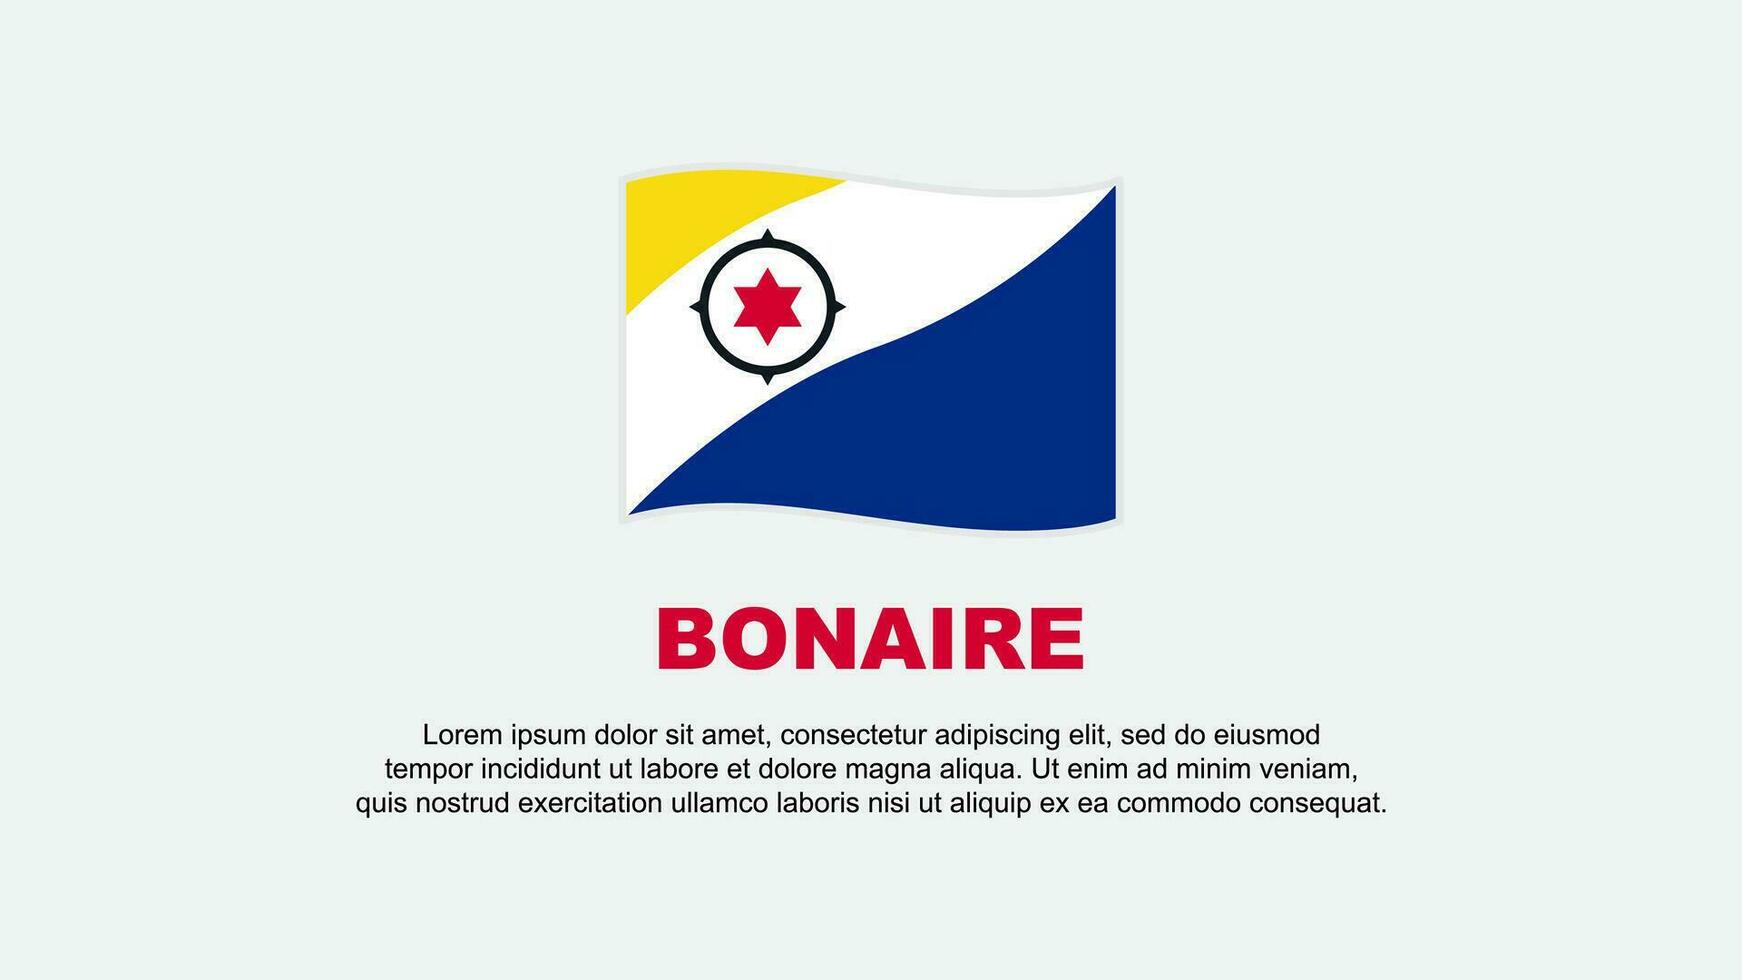 Bonaire Flag Abstract Background Design Template. Bonaire Independence Day Banner Social Media Vector Illustration. Bonaire Background